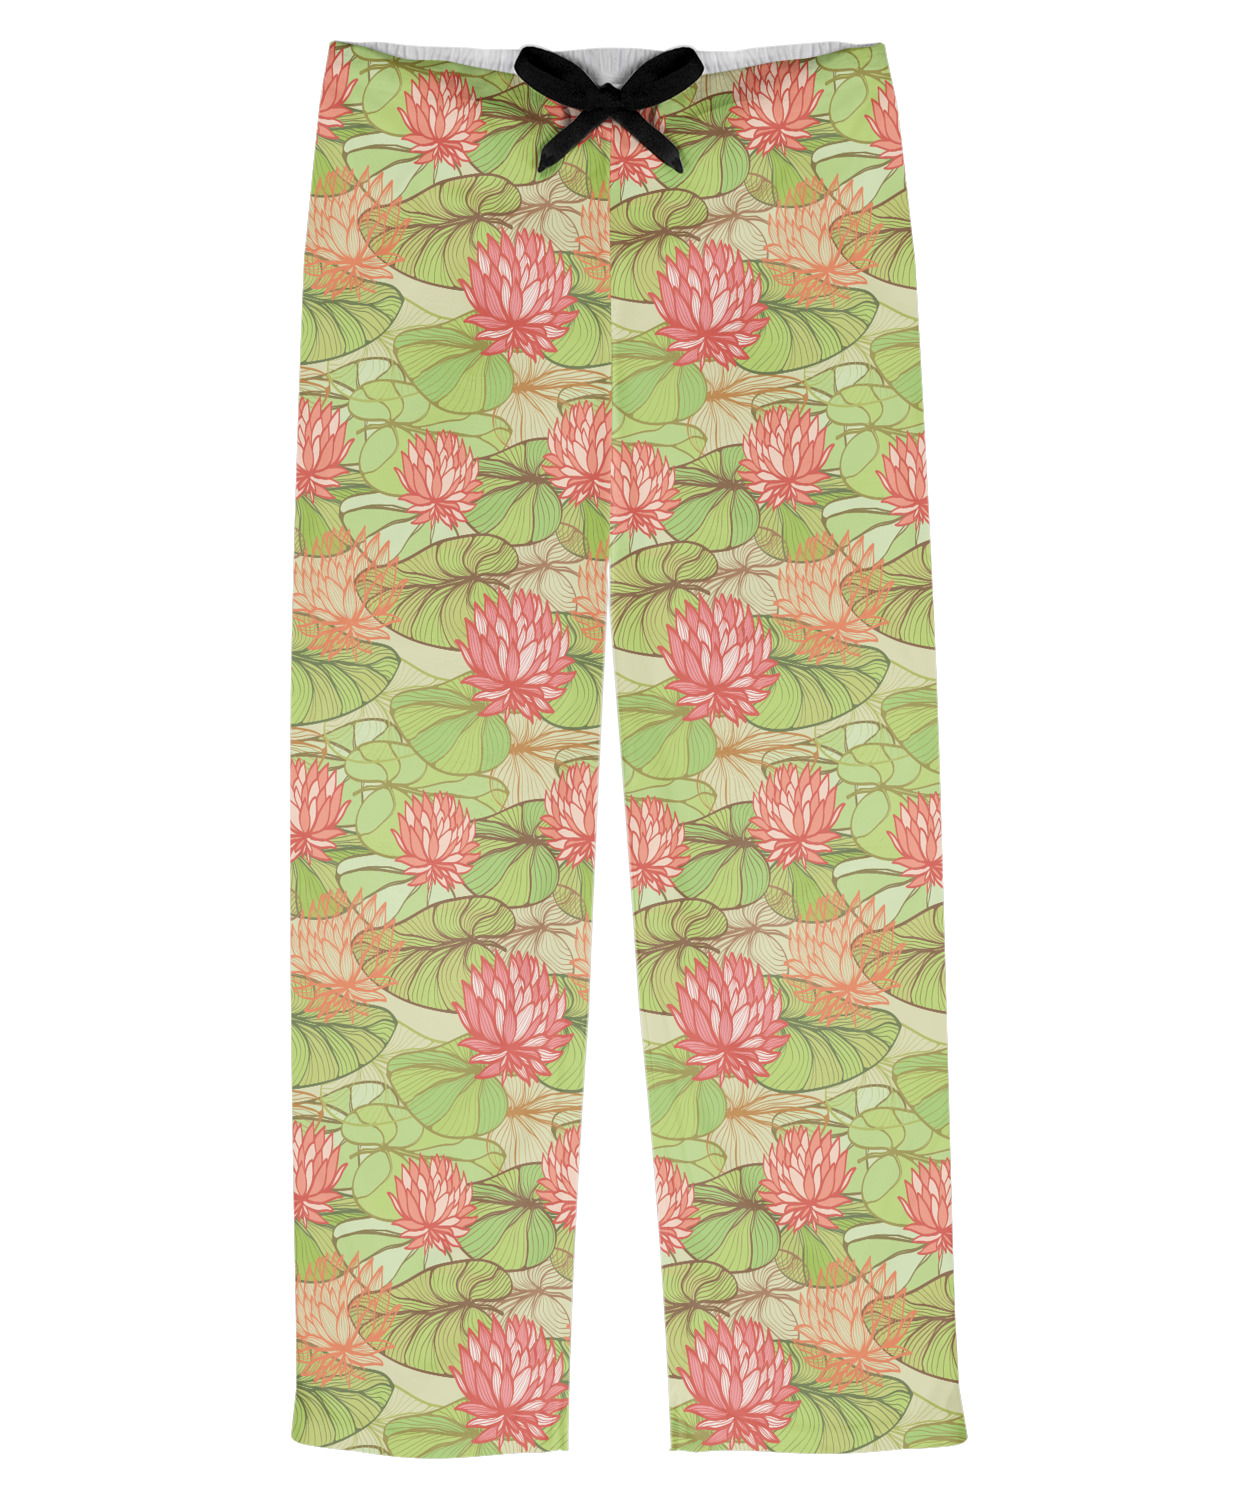 Lily Pads Mens Pajama Pants (Personalized) - YouCustomizeIt